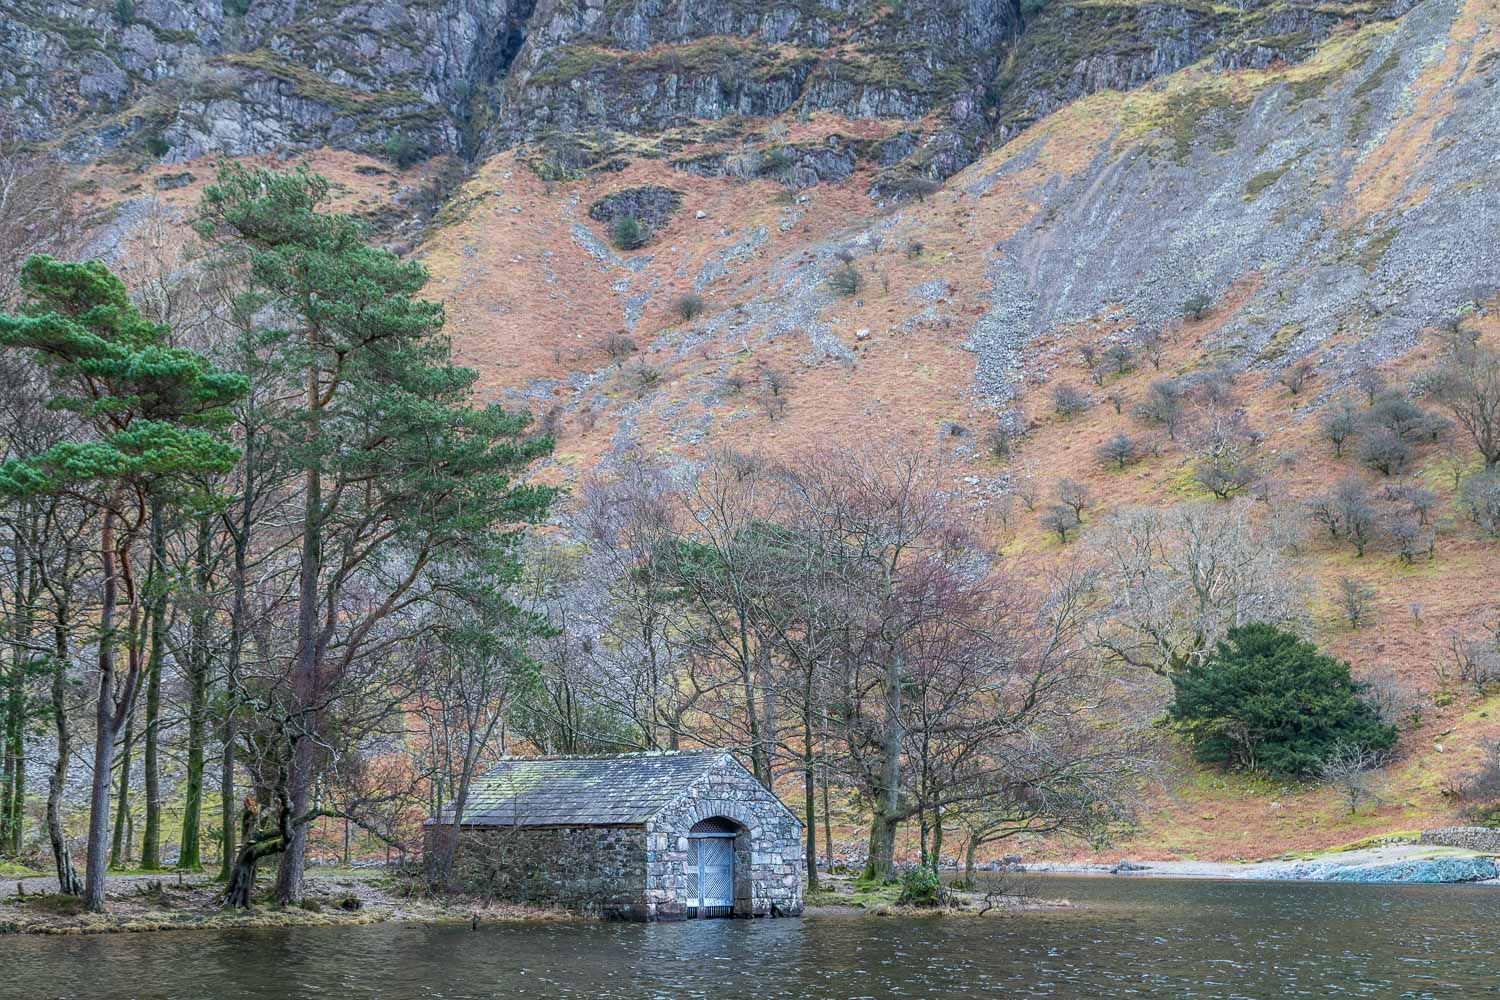 Wast Water boathouse, Wastwater boathouse